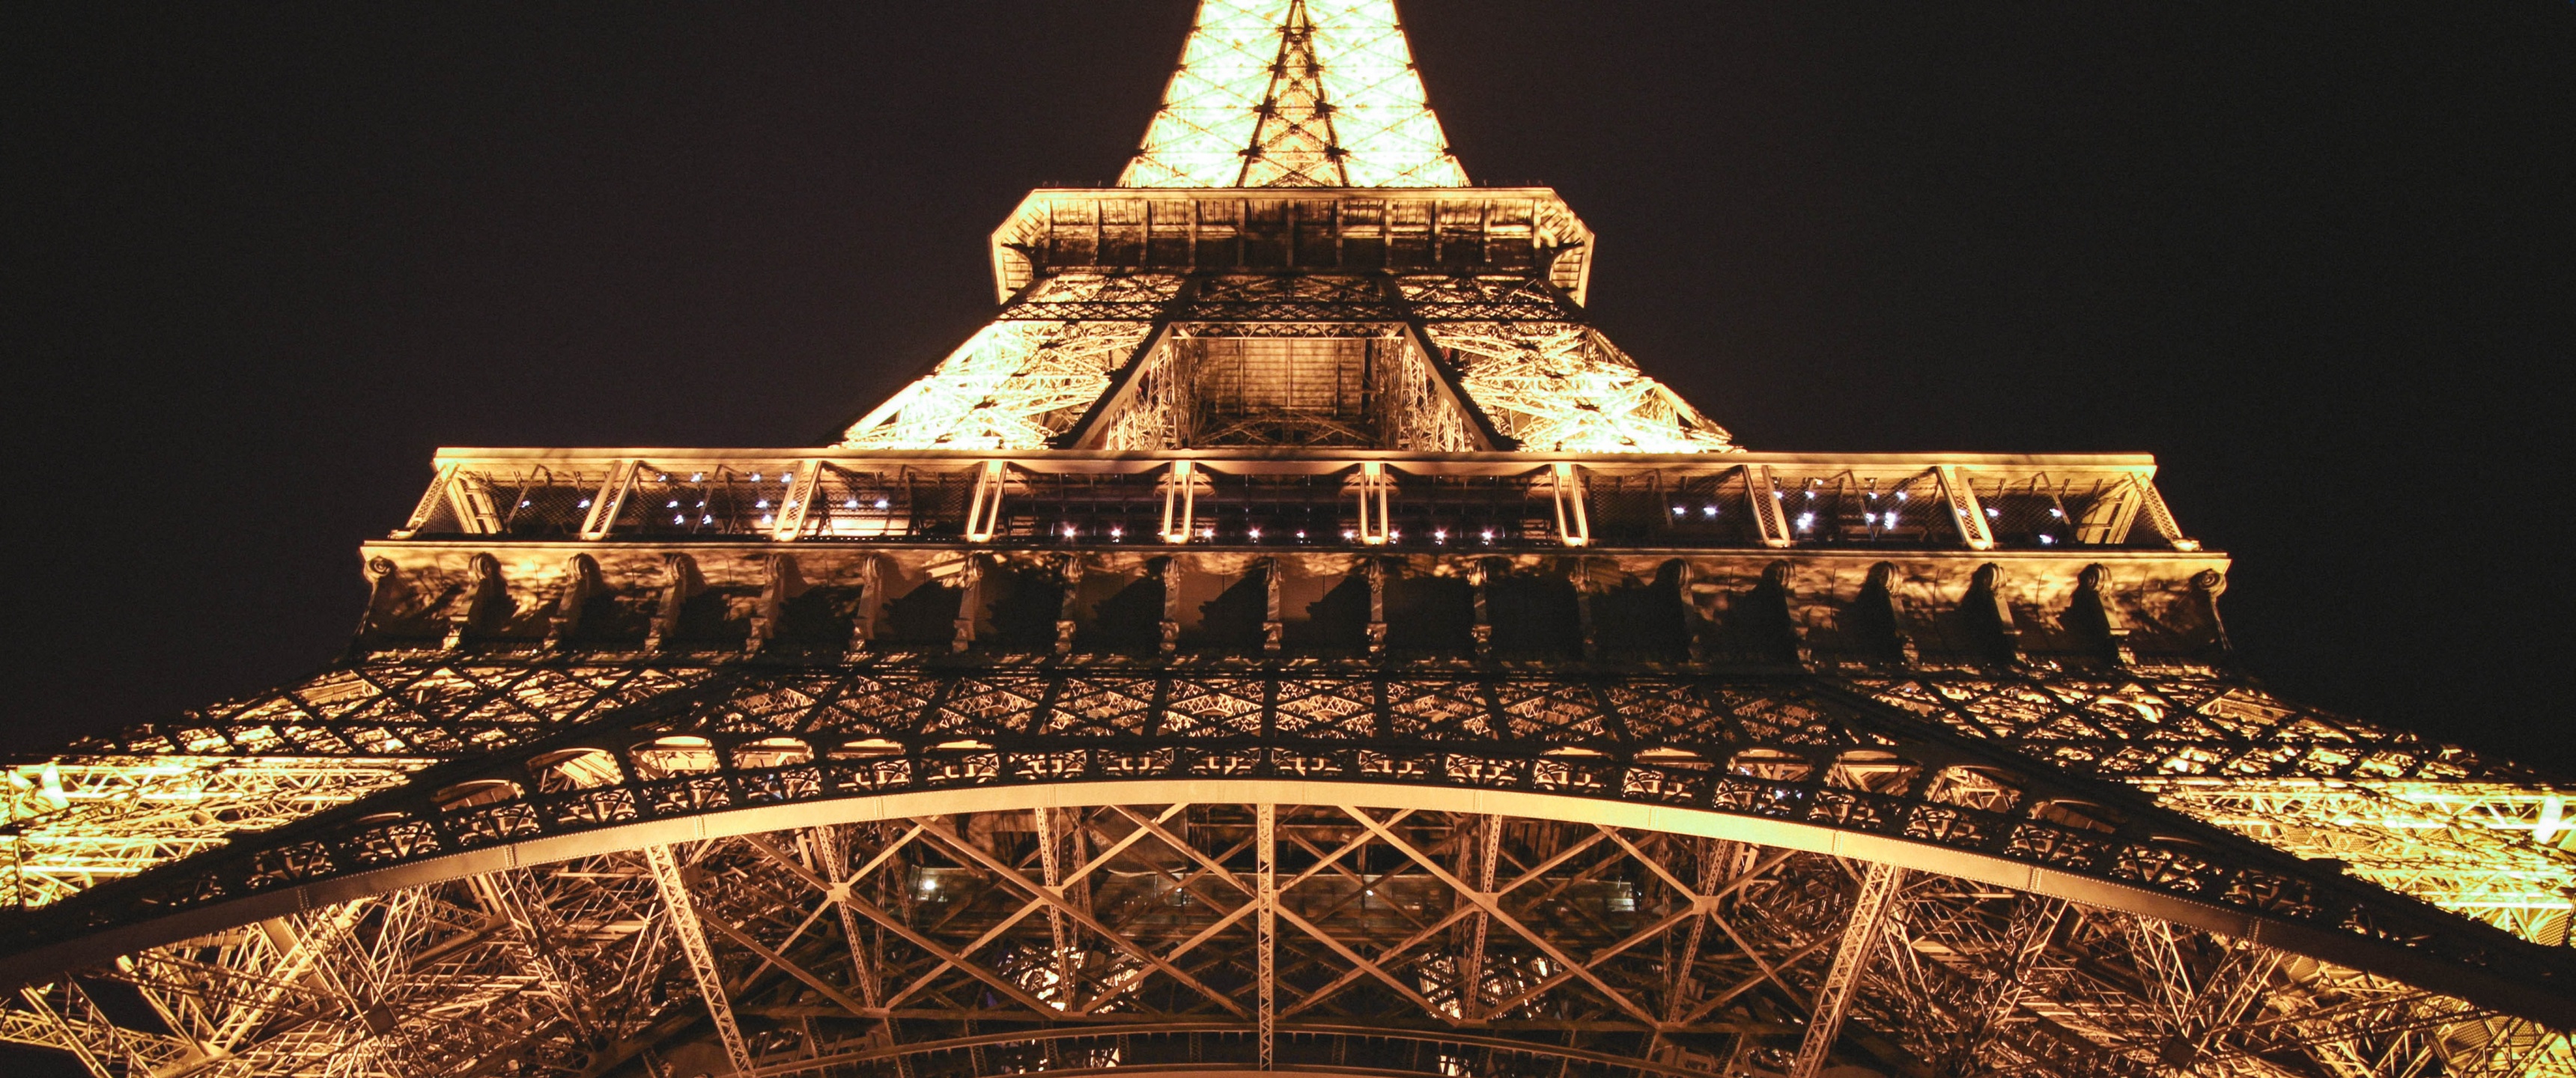 Paris Wallpapers and Backgrounds  WallpaperCG